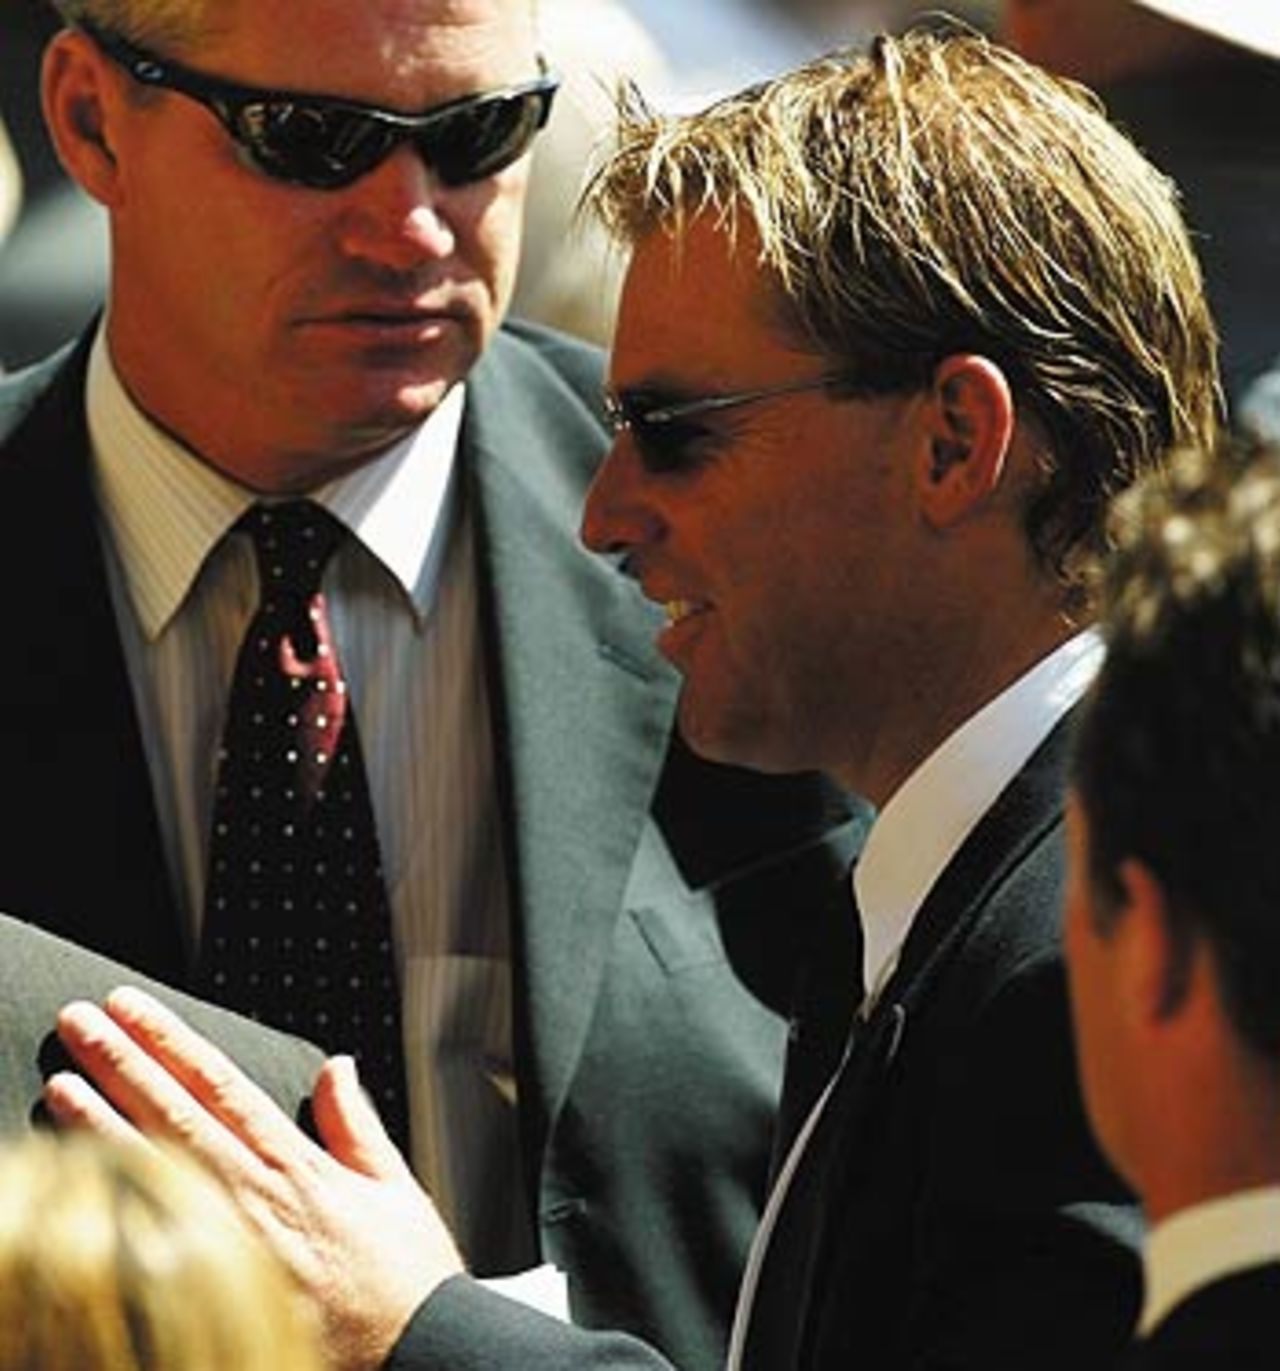 Shane Warne and Dean Jones arrive to pay their tributes, Adelaide, January 27, 2004